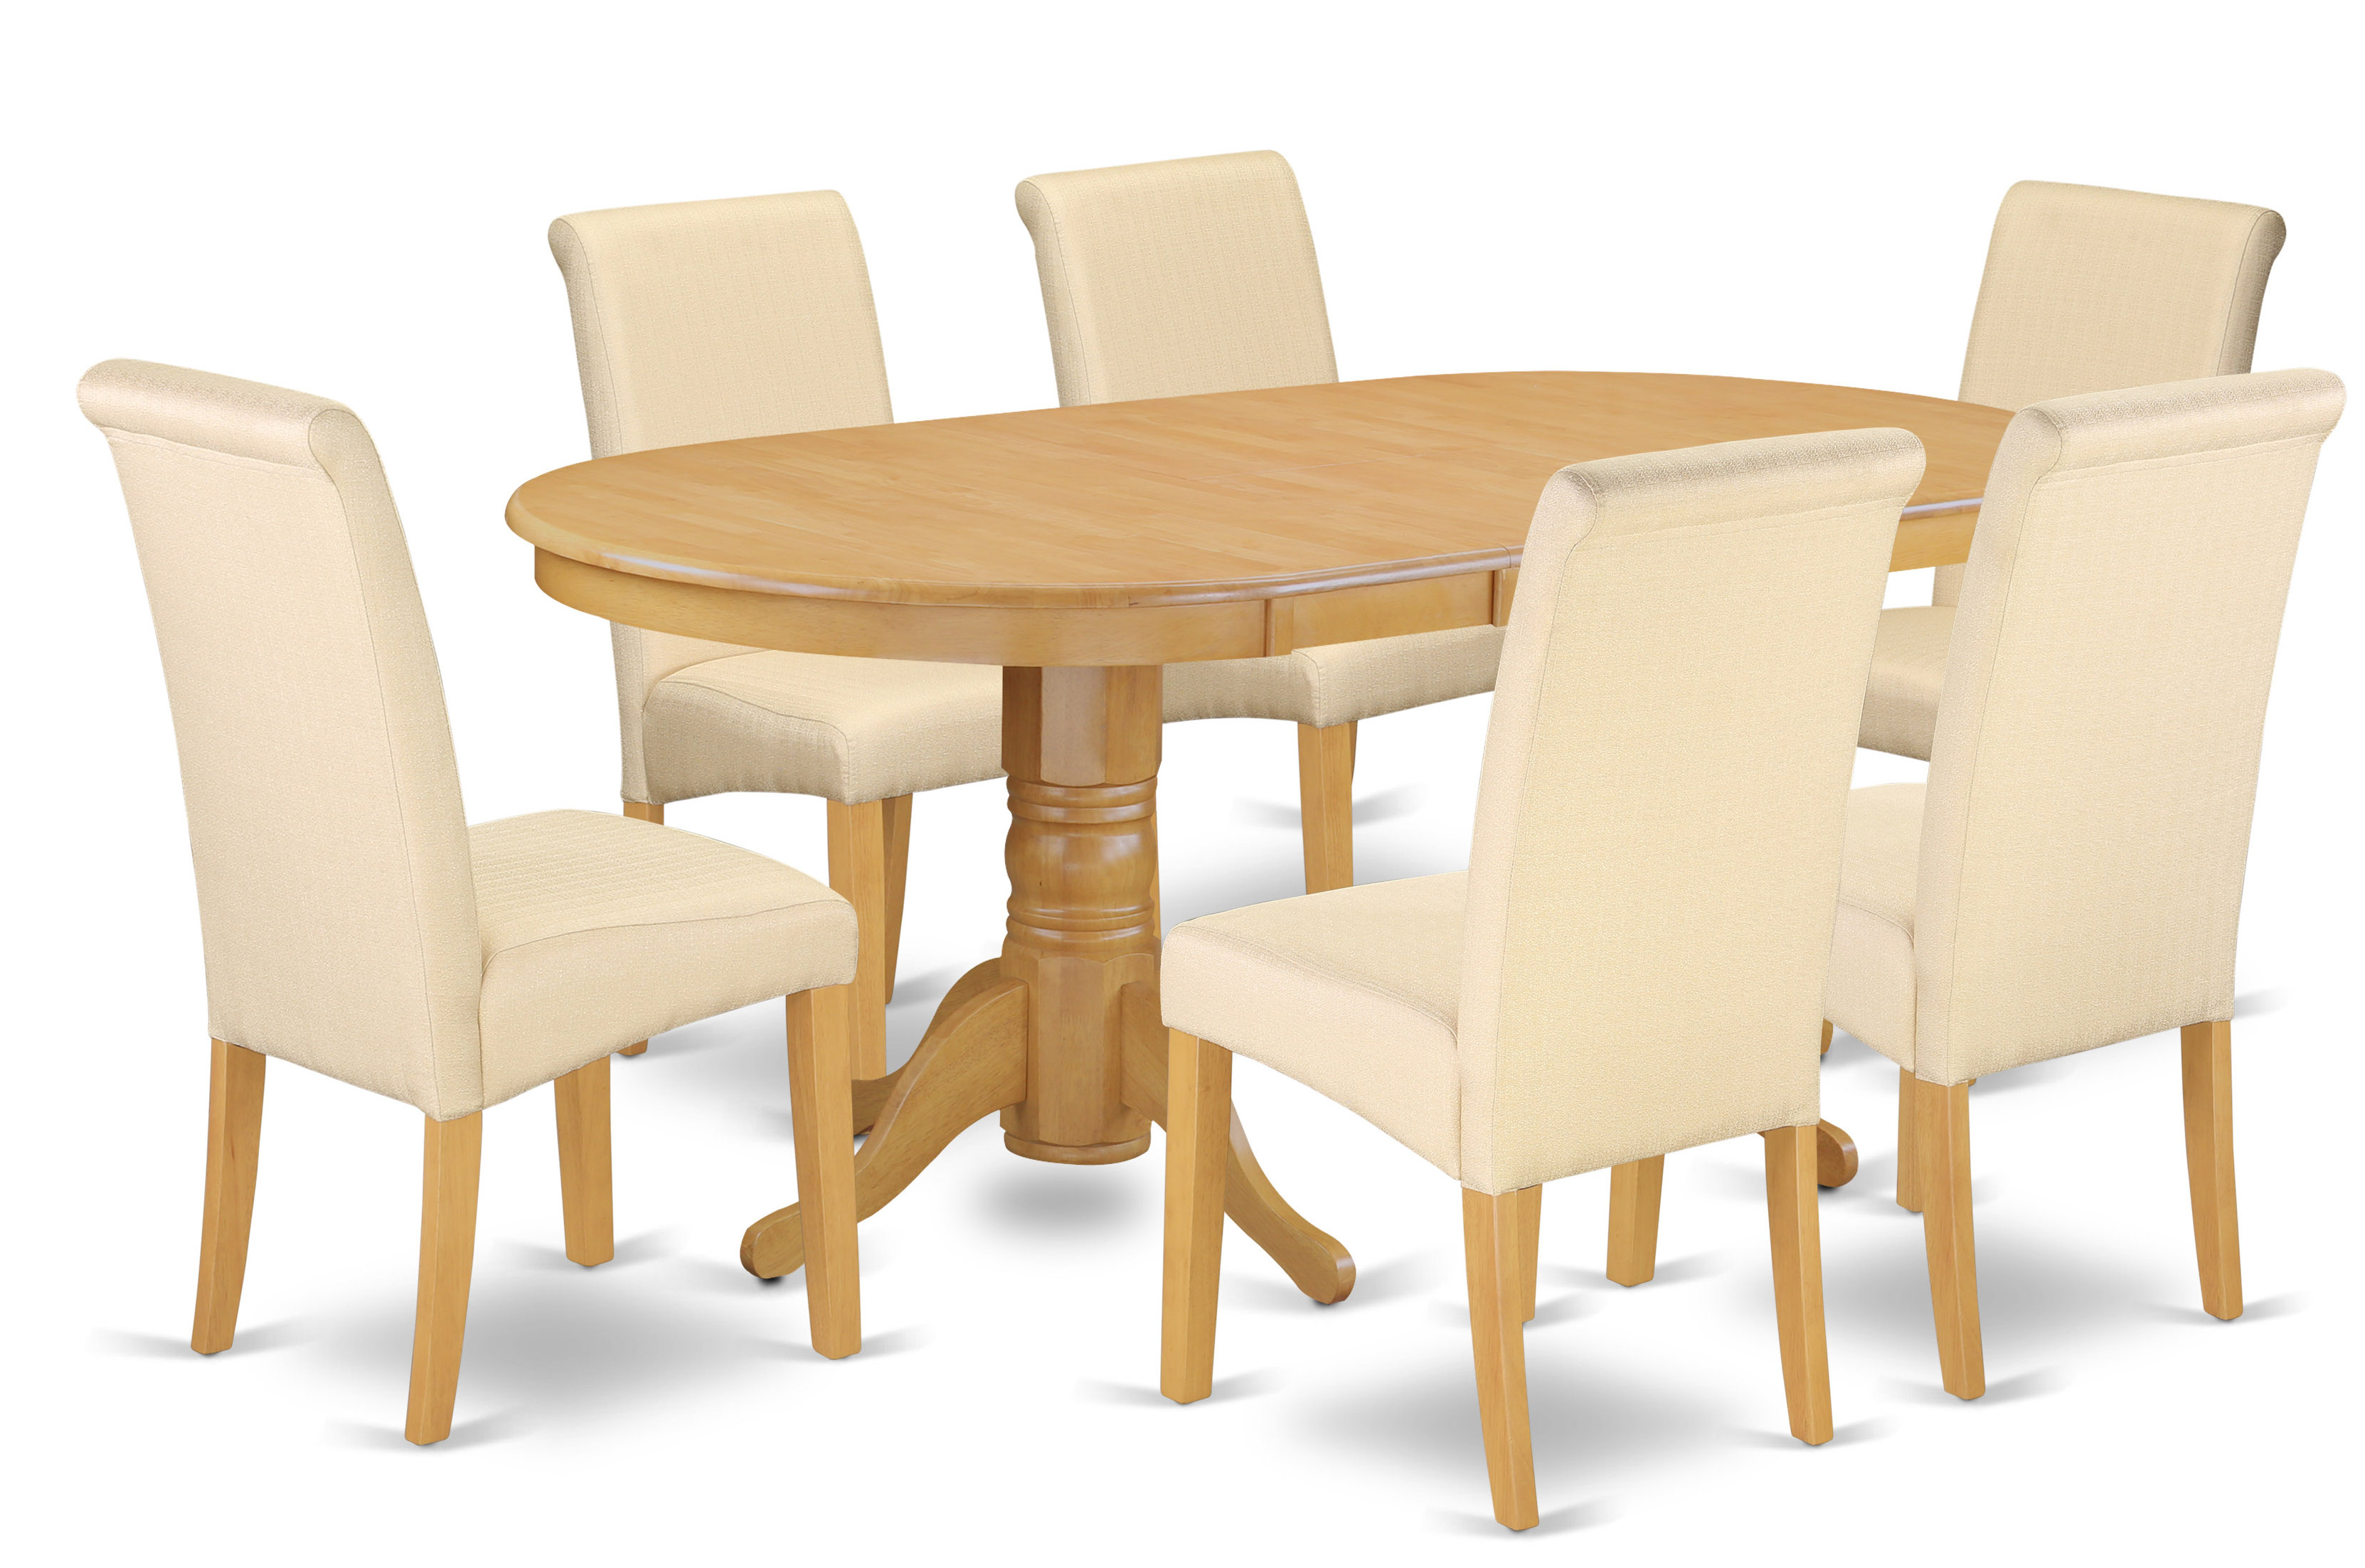 Charlton Home Paras 7 Piece Butterfly Leaf Solid Wood Dining Set Wayfair